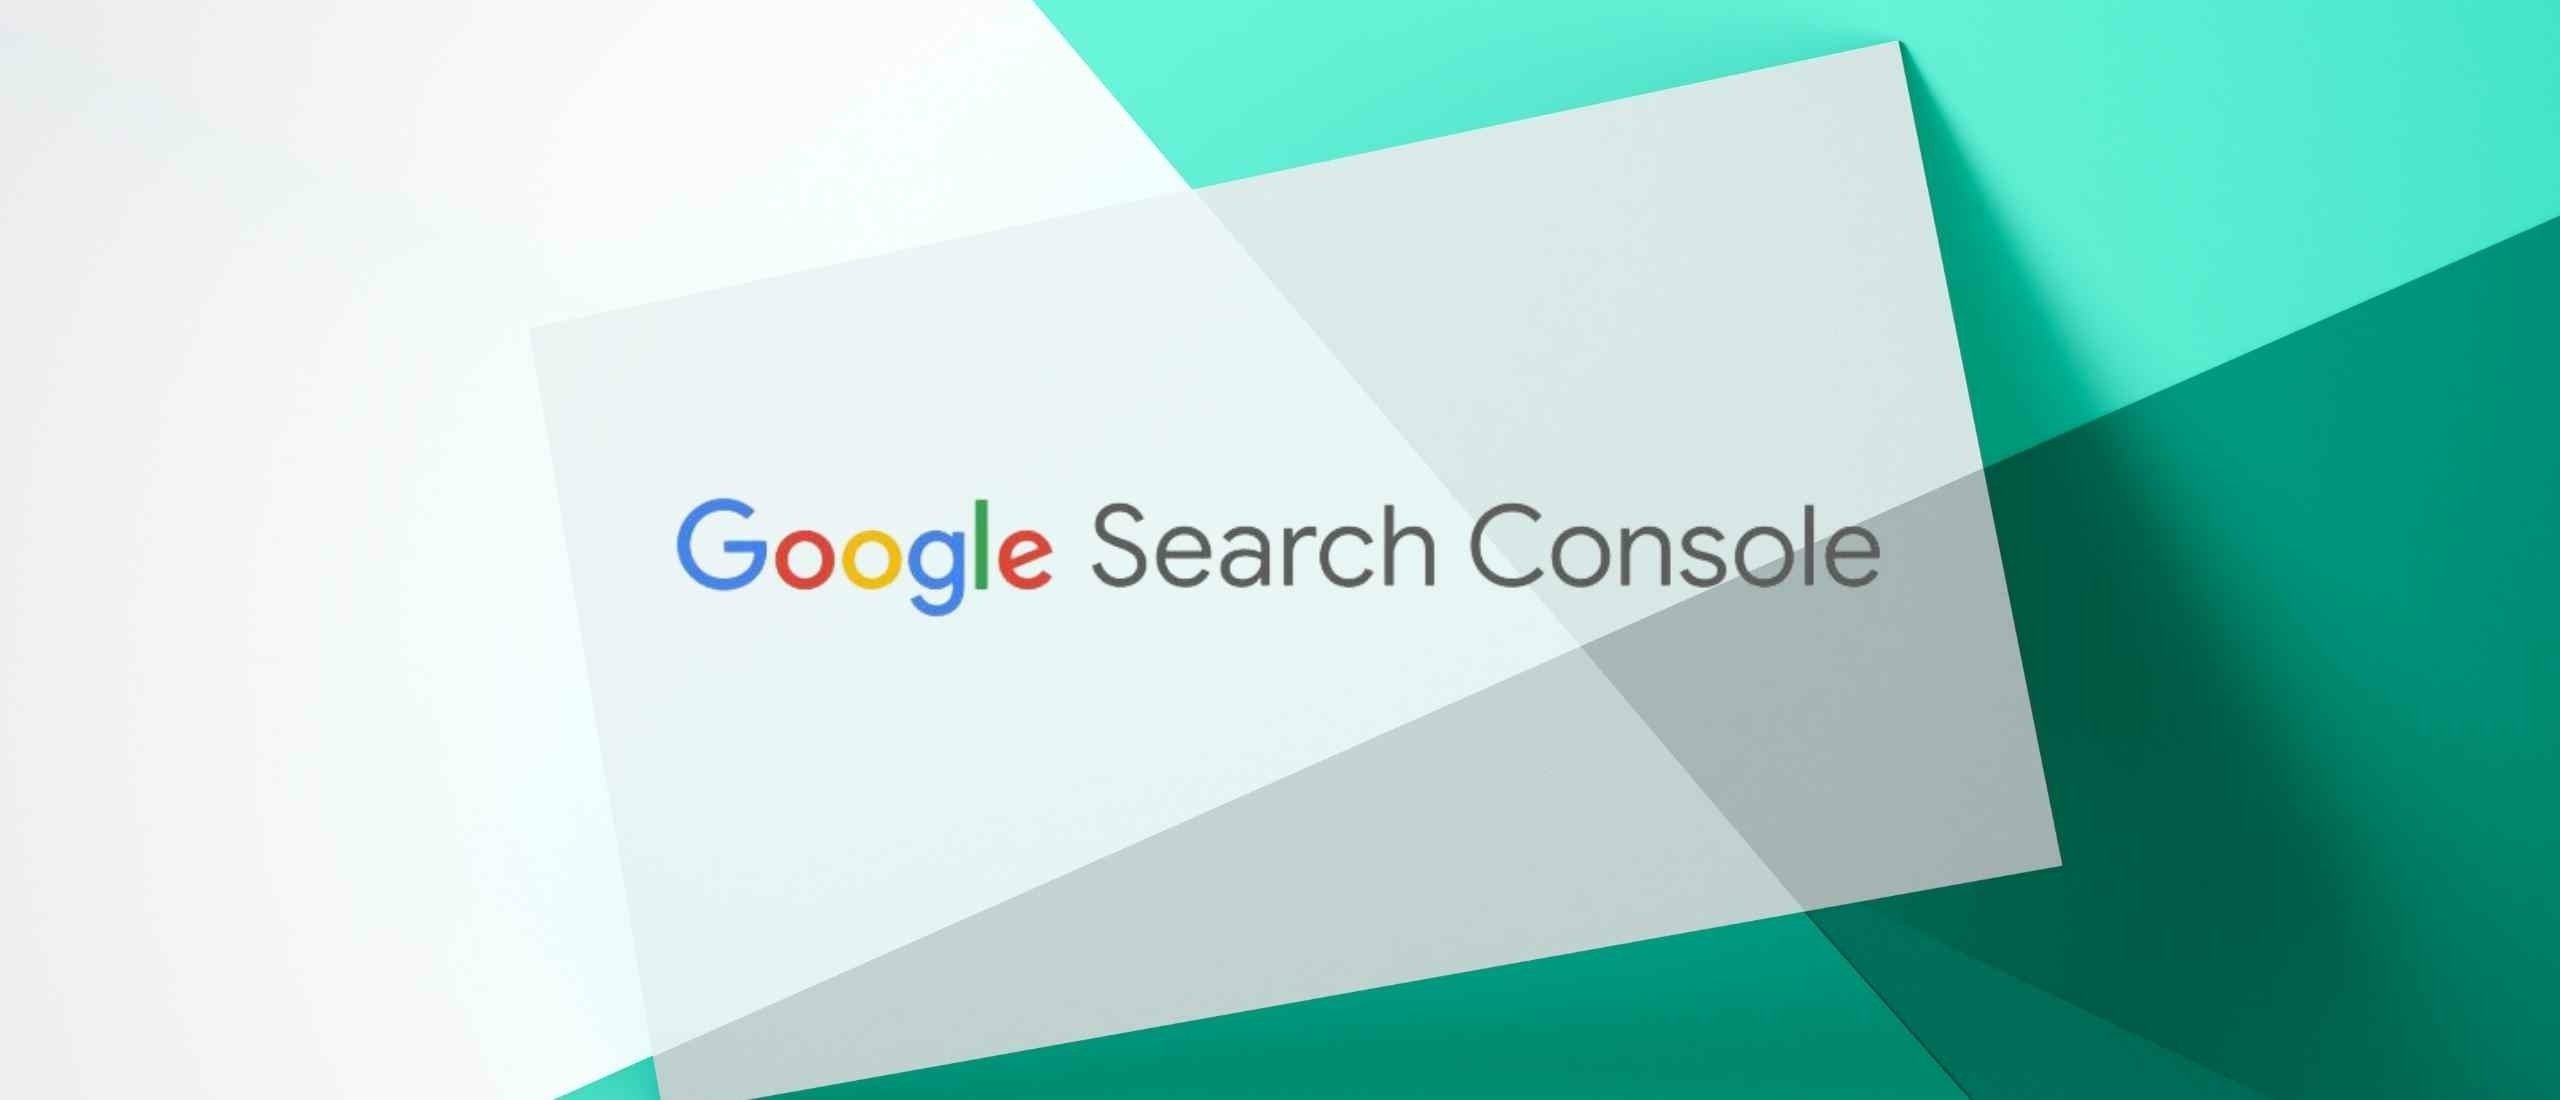 google-search-console-voor-marketeers